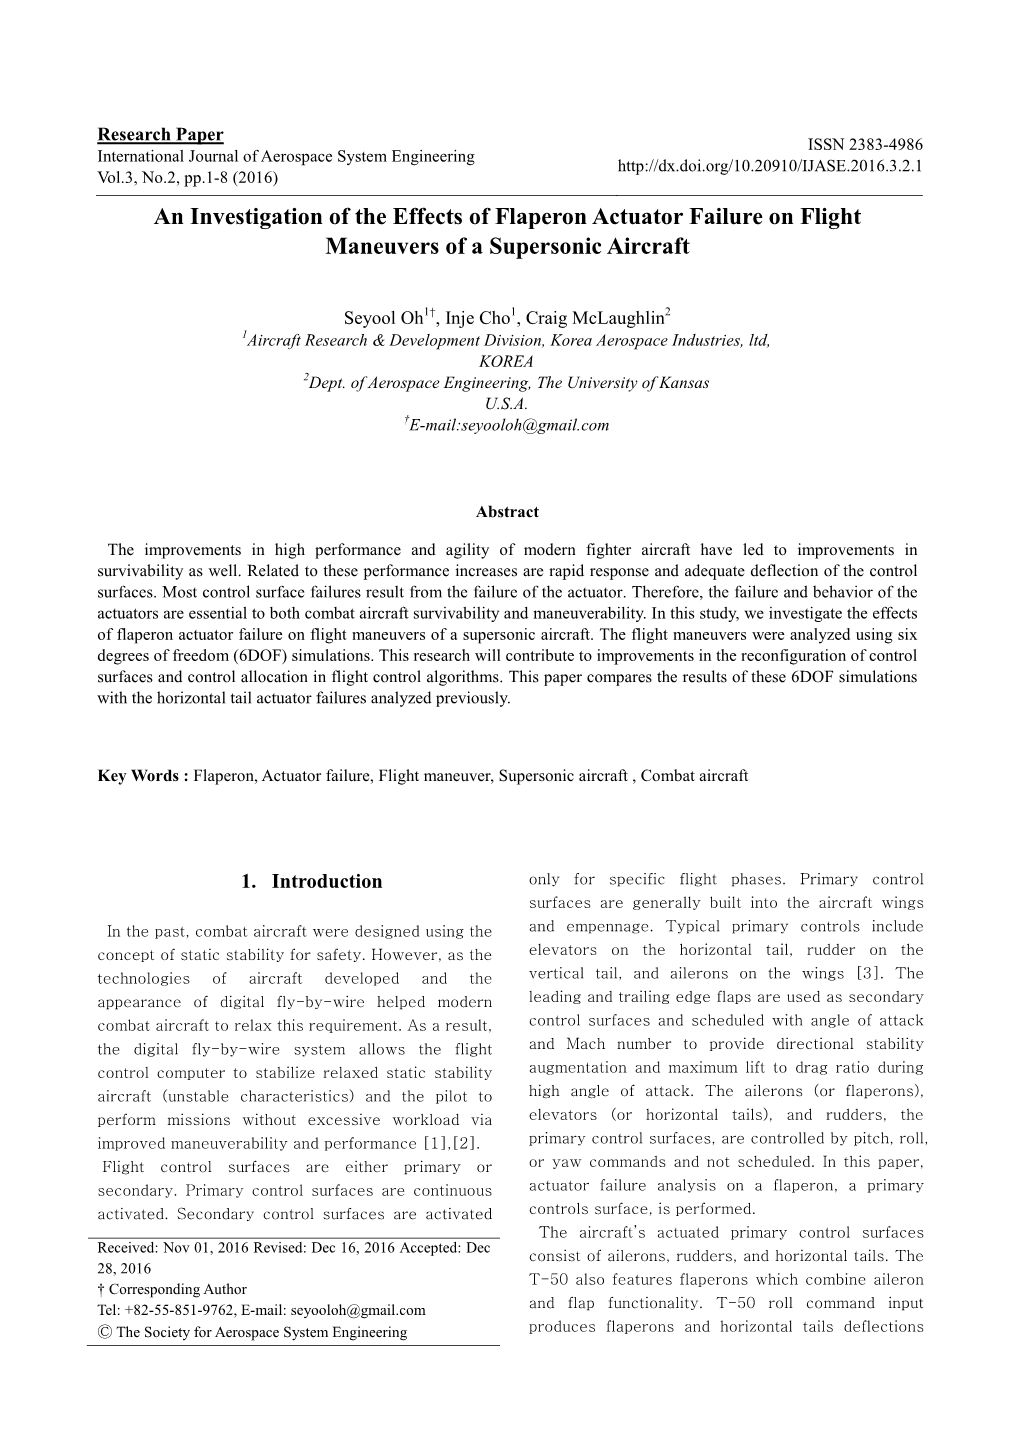 An Investigation of the Effects of Flaperon Actuator Failure on Flight Maneuvers of a Supersonic Aircraft